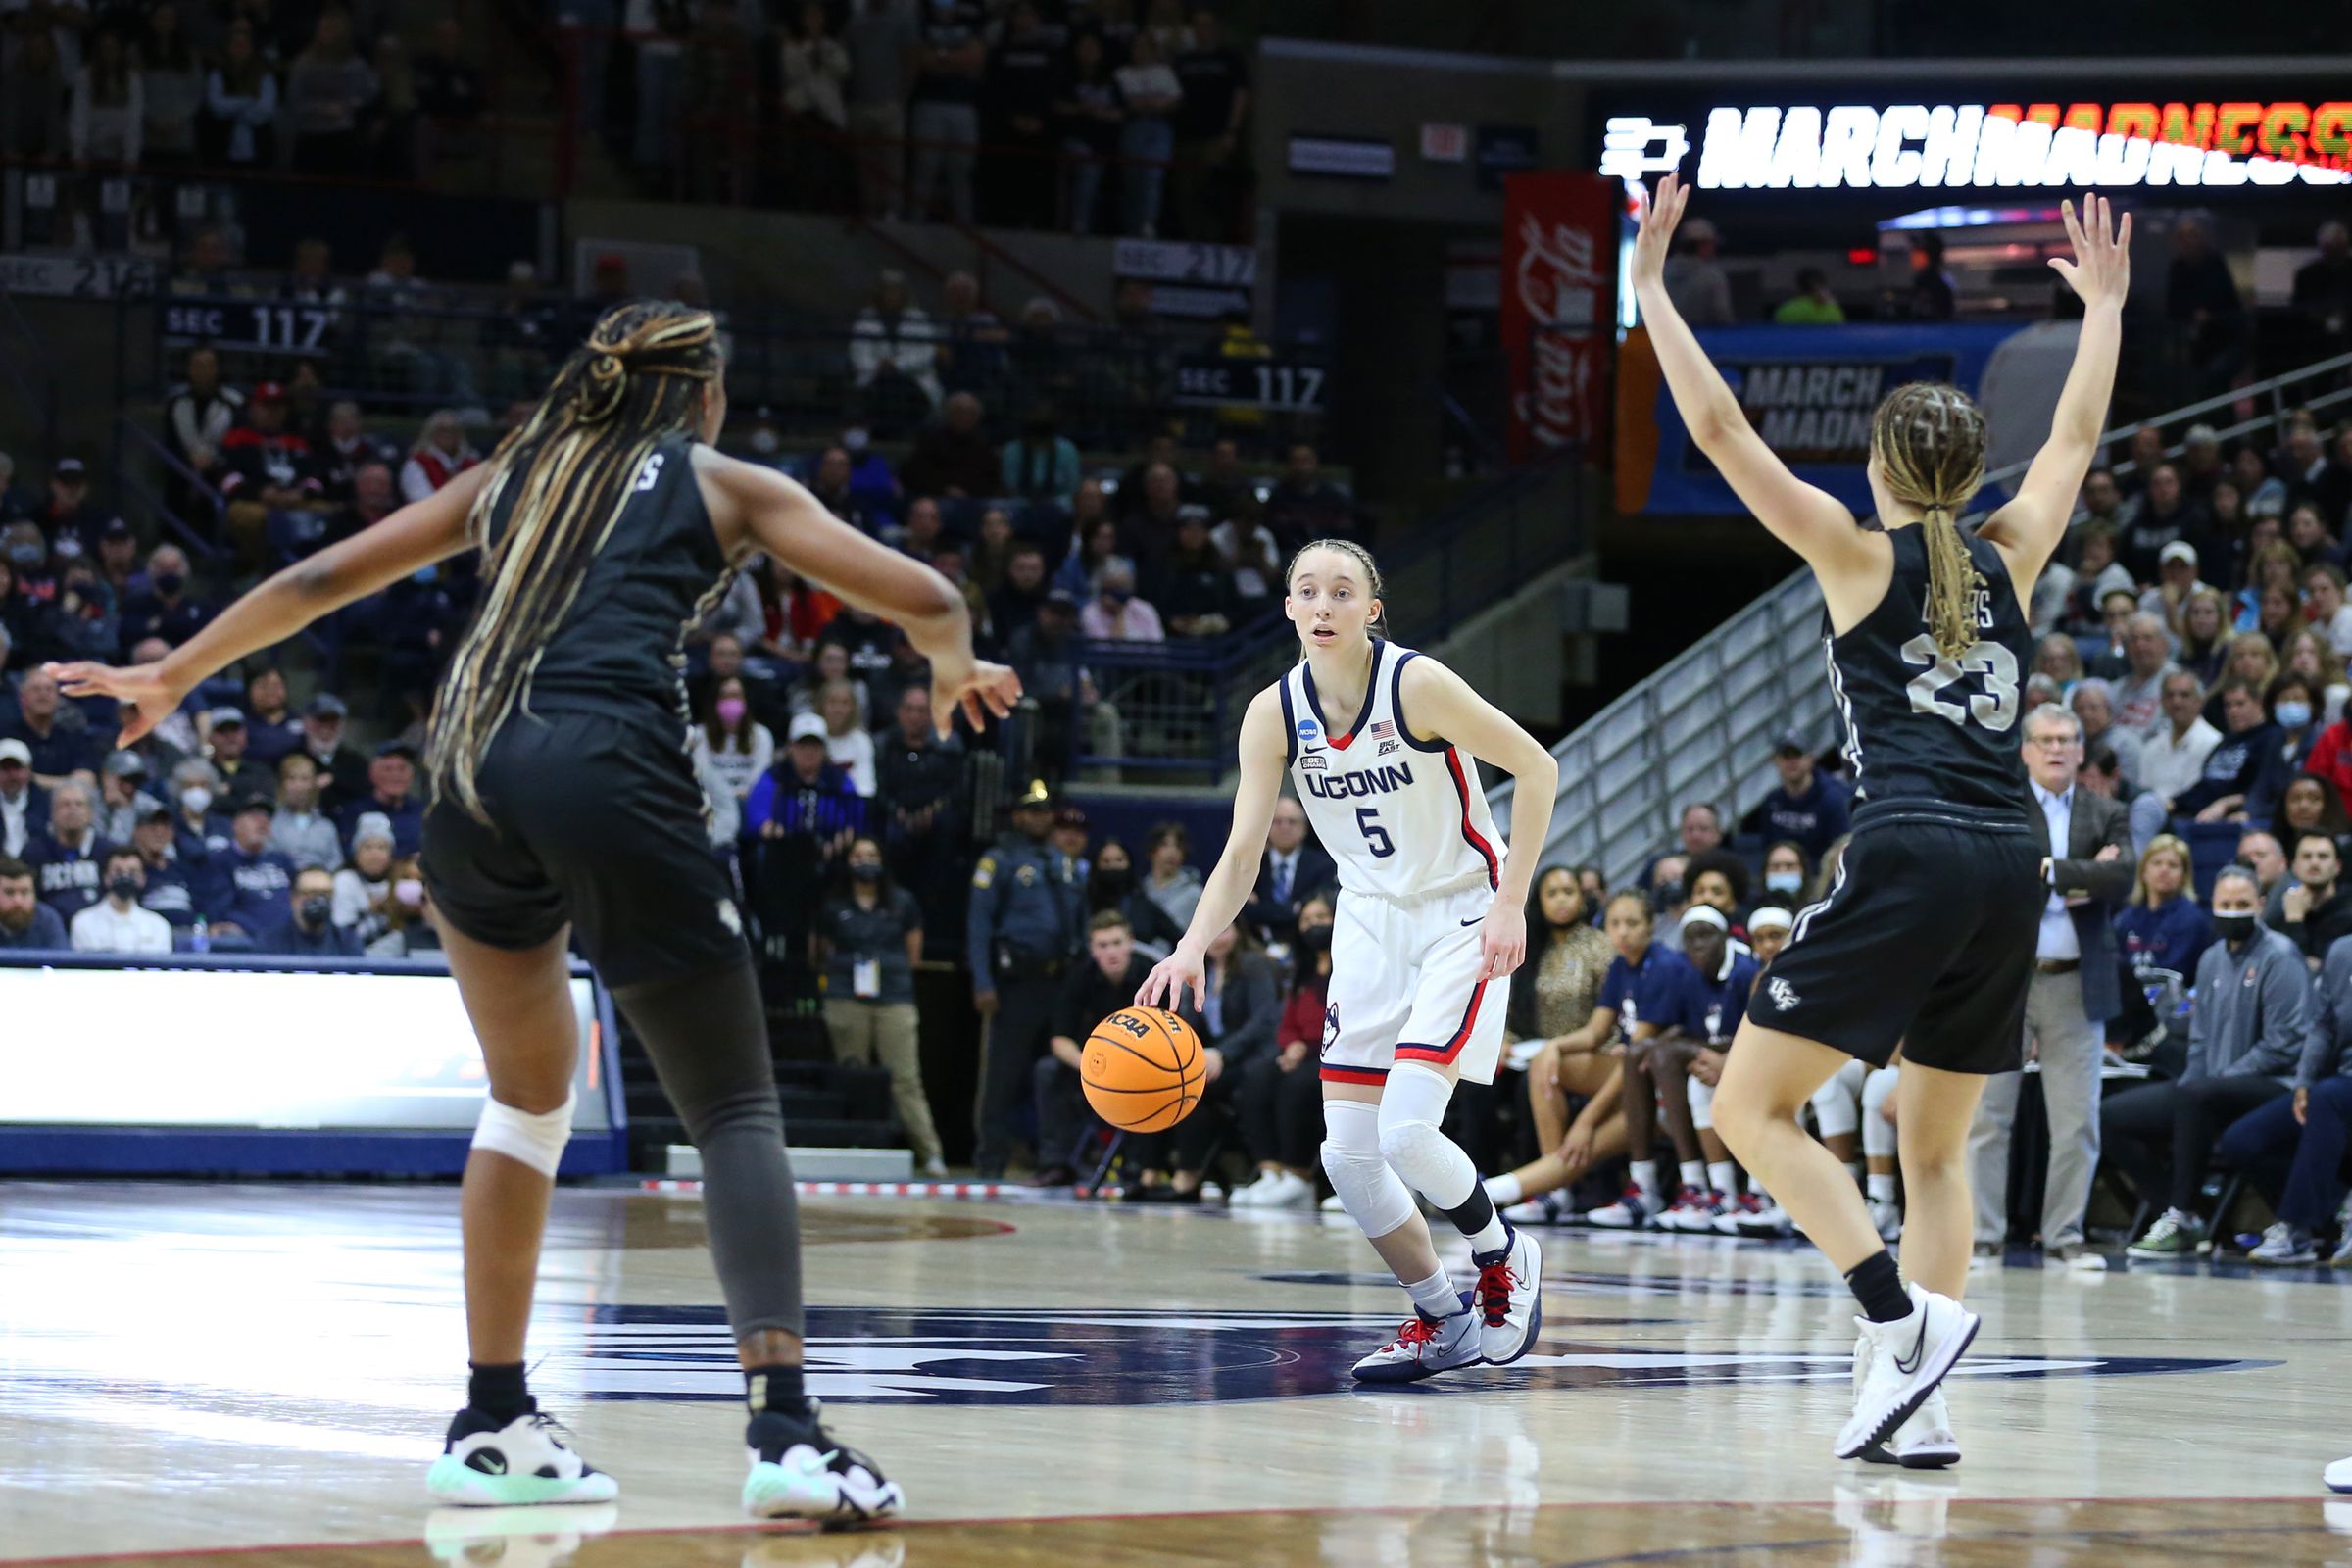 NCAA BASKETBALL: MAR 21 Div I Womens Championship - Second Round - UCF at UConn